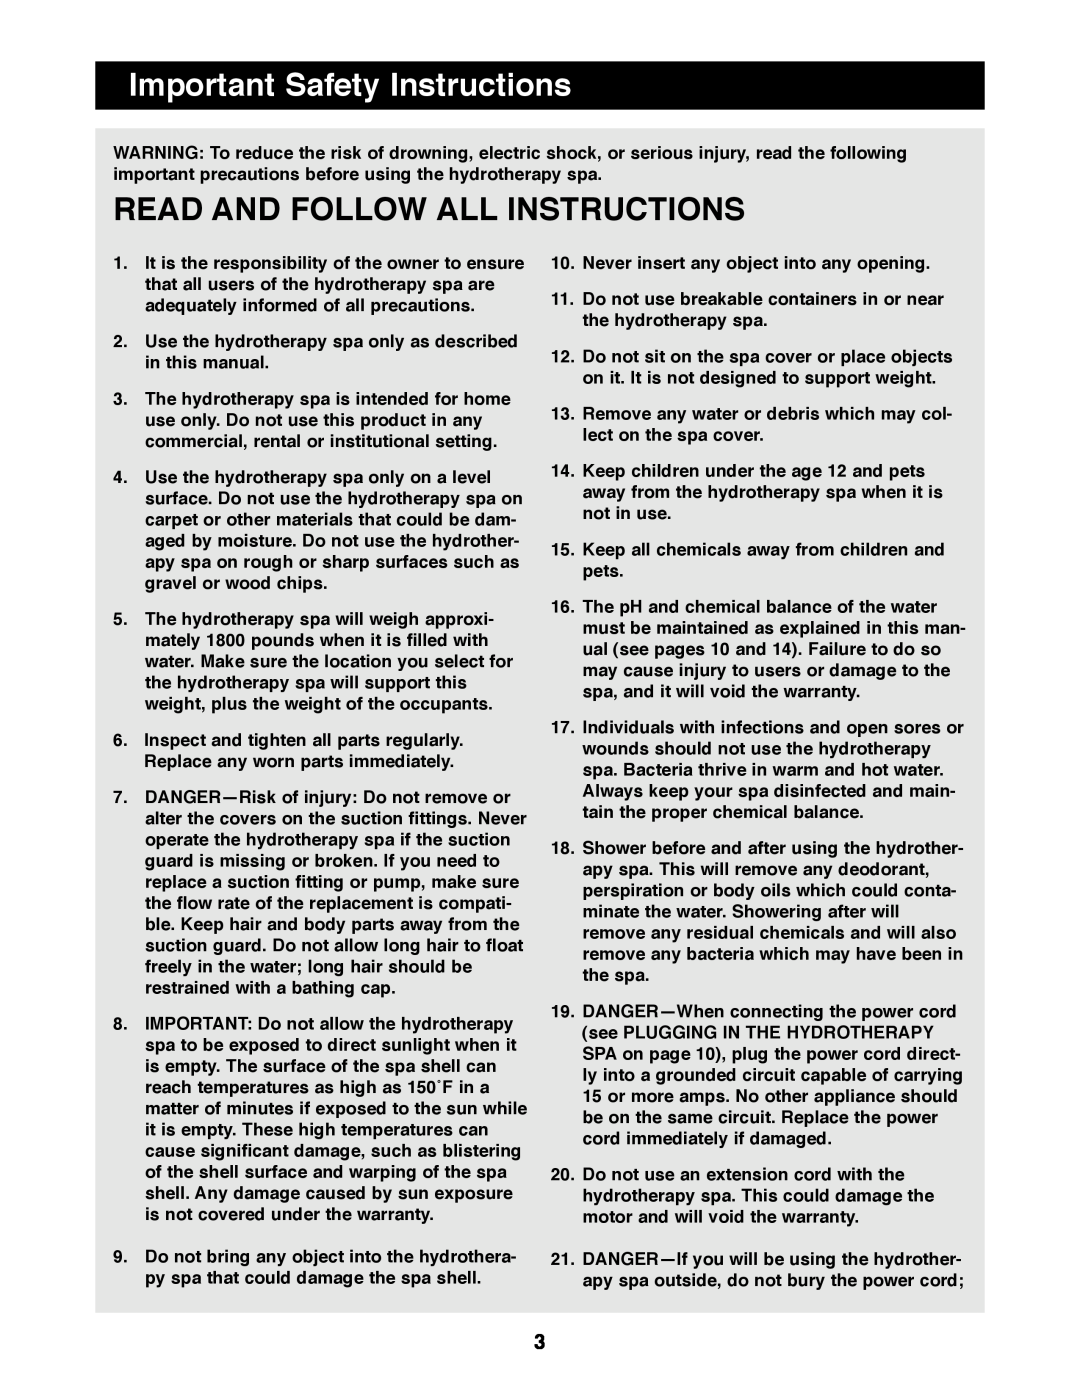 Image IMHS40090 manual Important Safety Instructions, Read And Follow All Instructions 